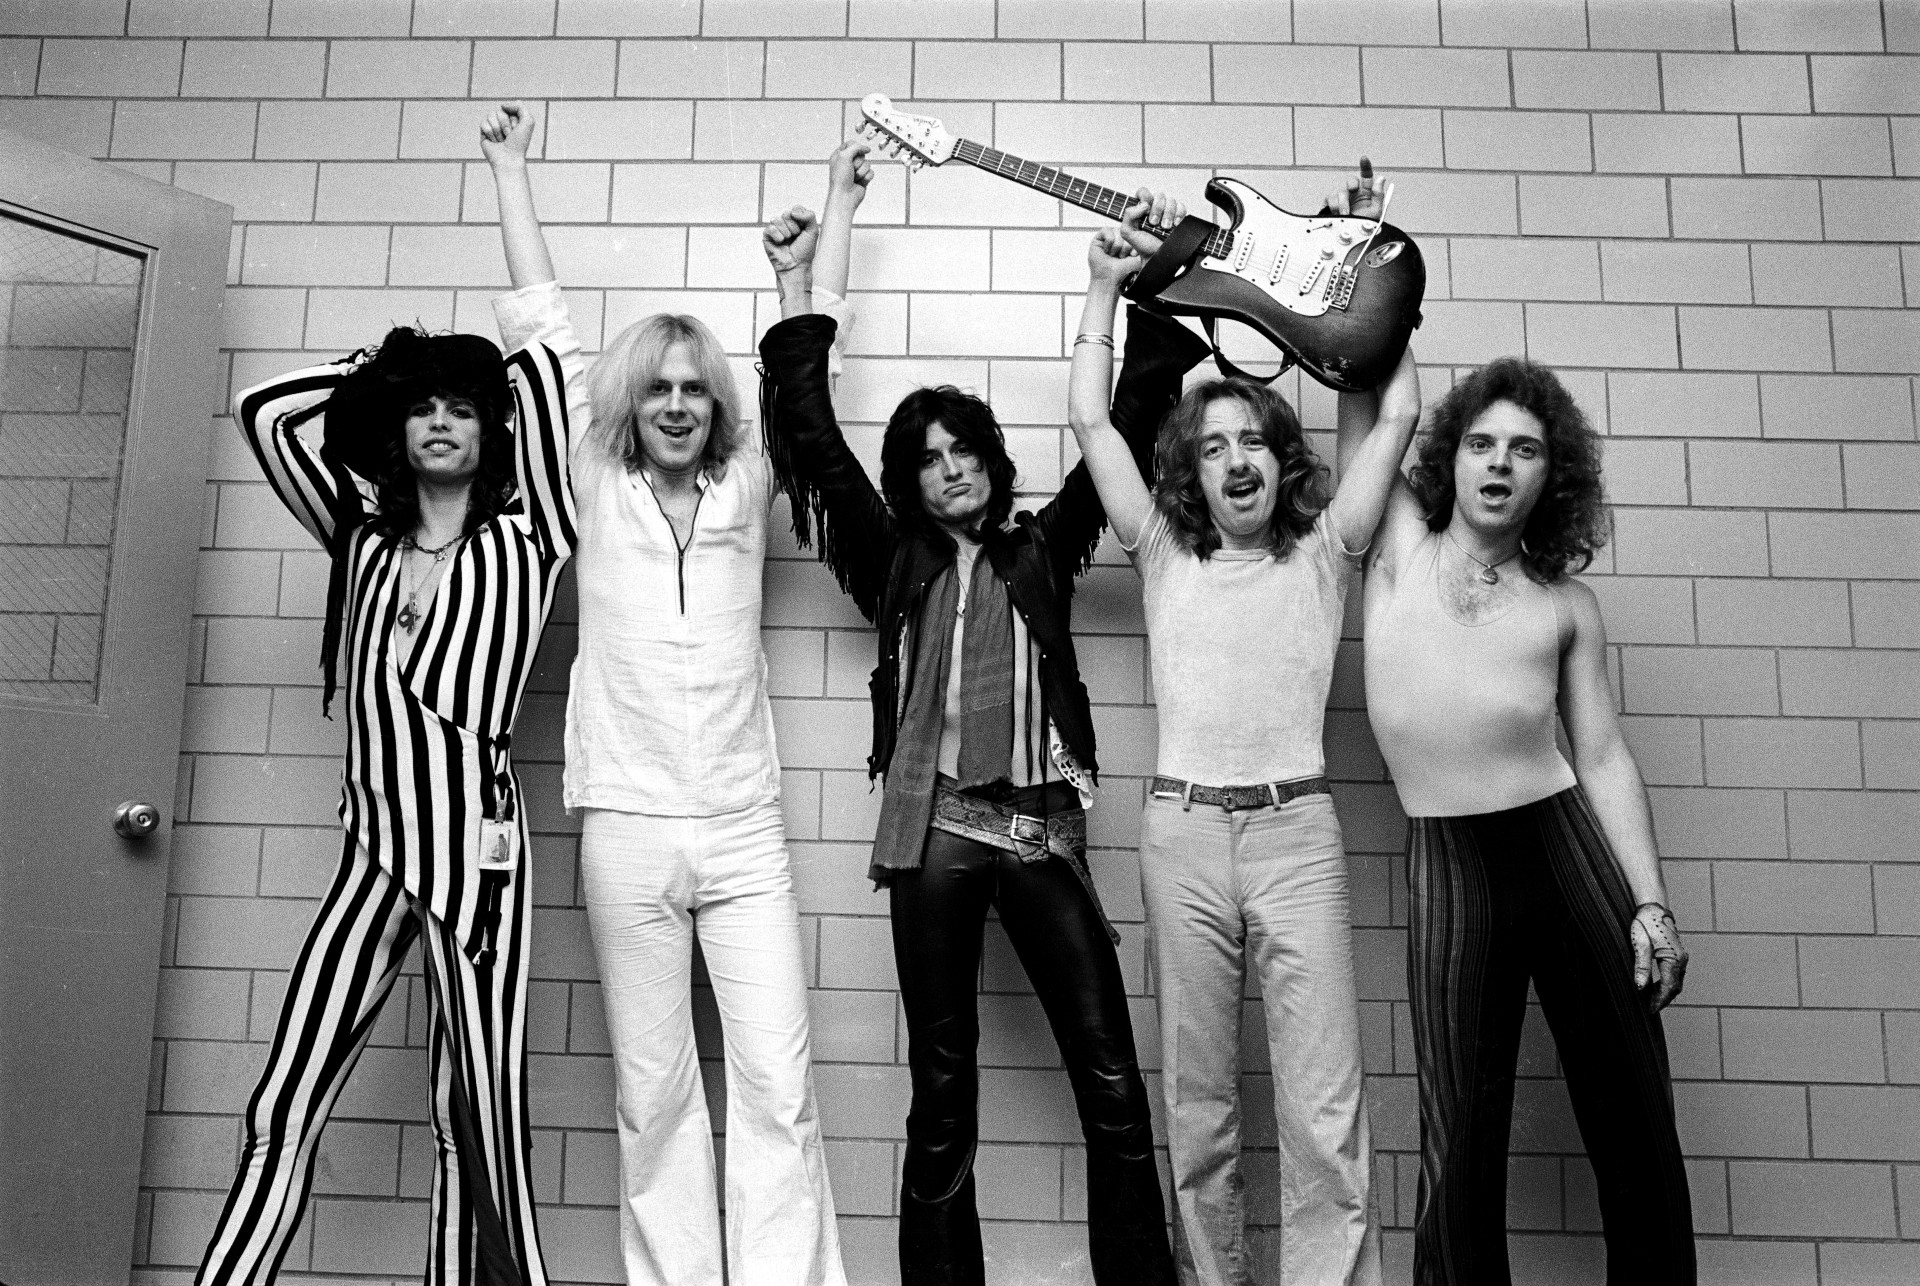 Aerosmith by Fin Costello Redferns - Getty Images